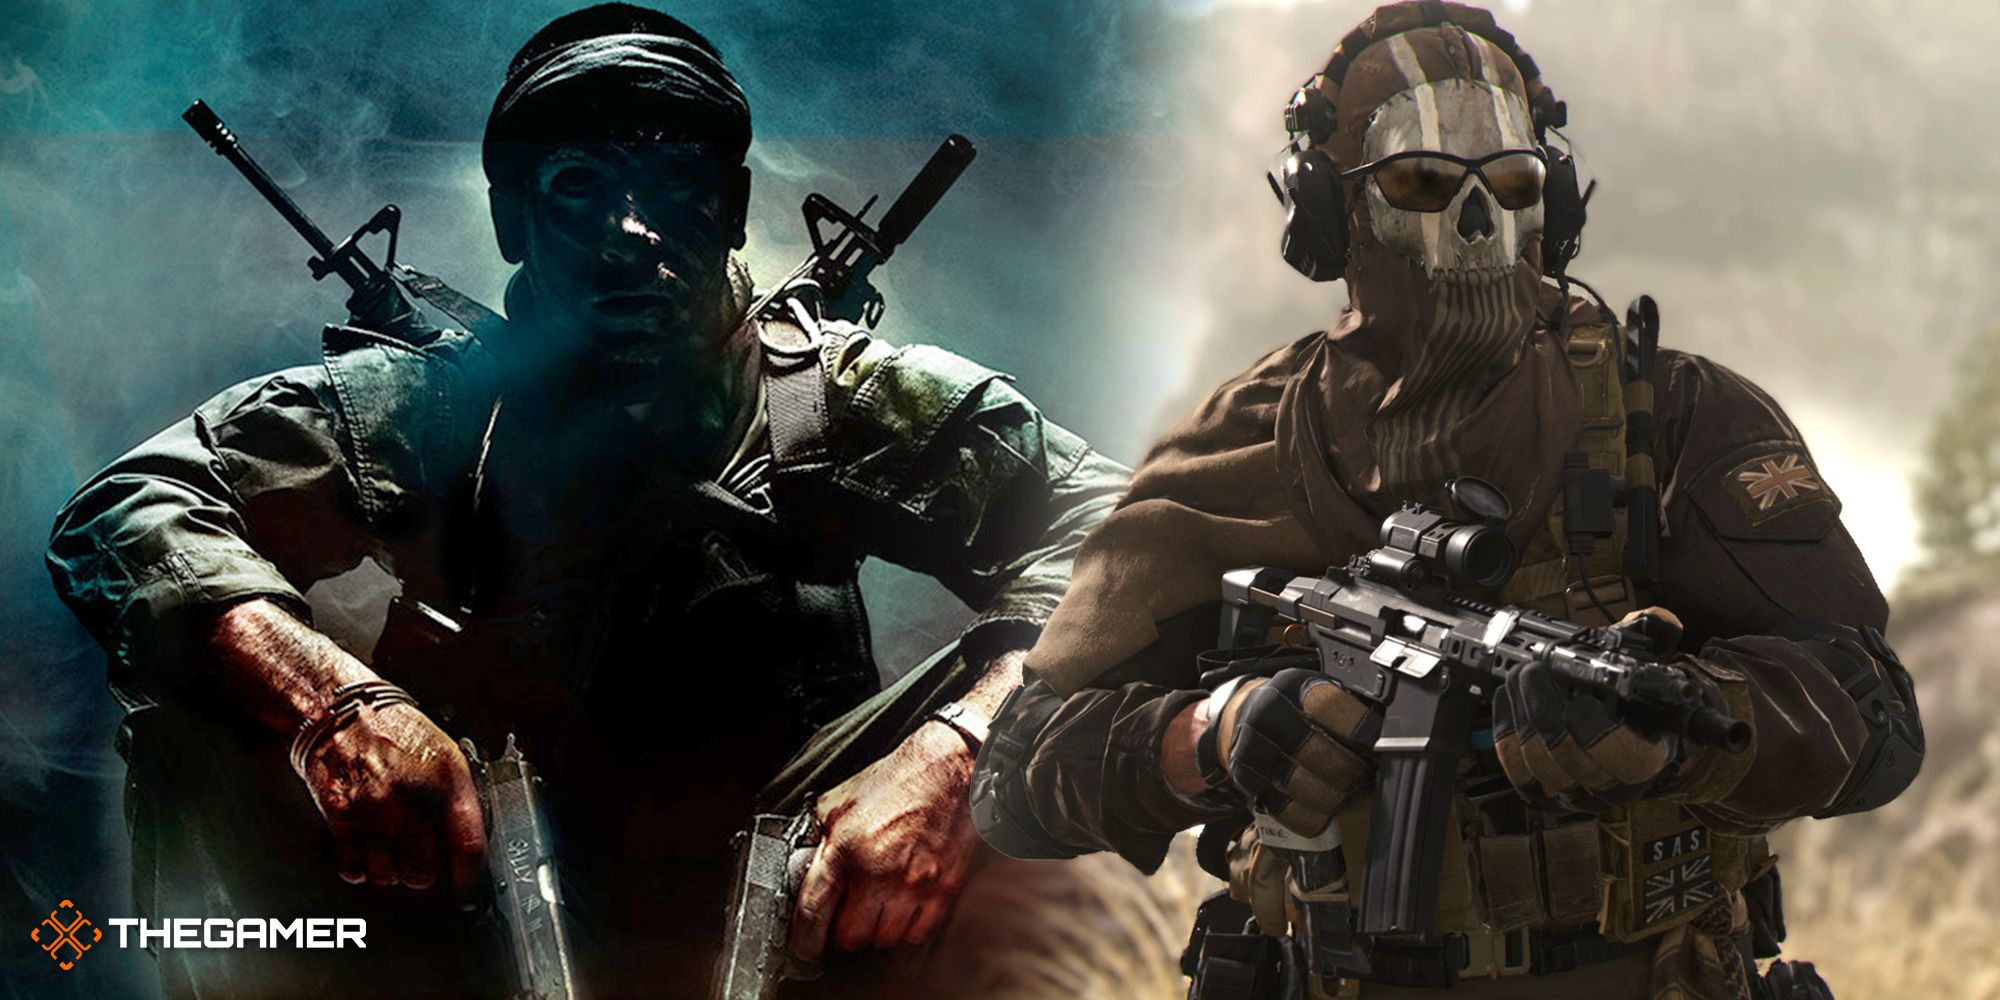 Game art from Call Of Duty Black Ops and Call of Duty Modern Warfare 2.